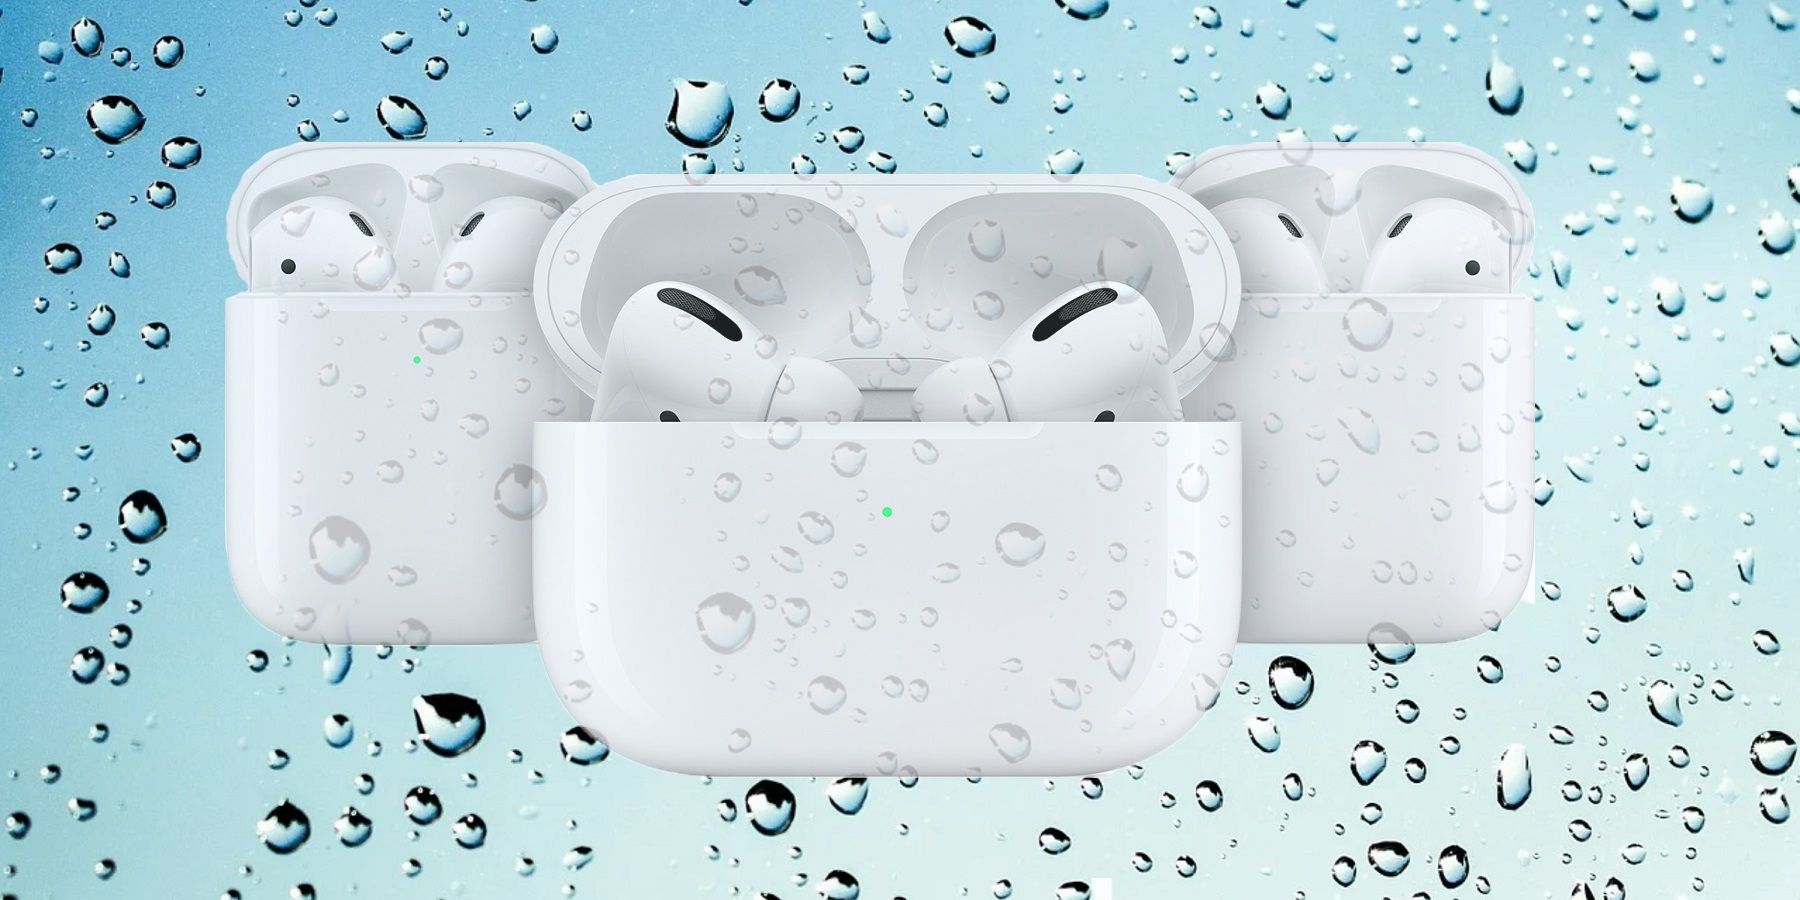 Forbindelse brugt Privilegium Apple AirPods & Pro Water Resistance Explained: What You Can & Cannot Do